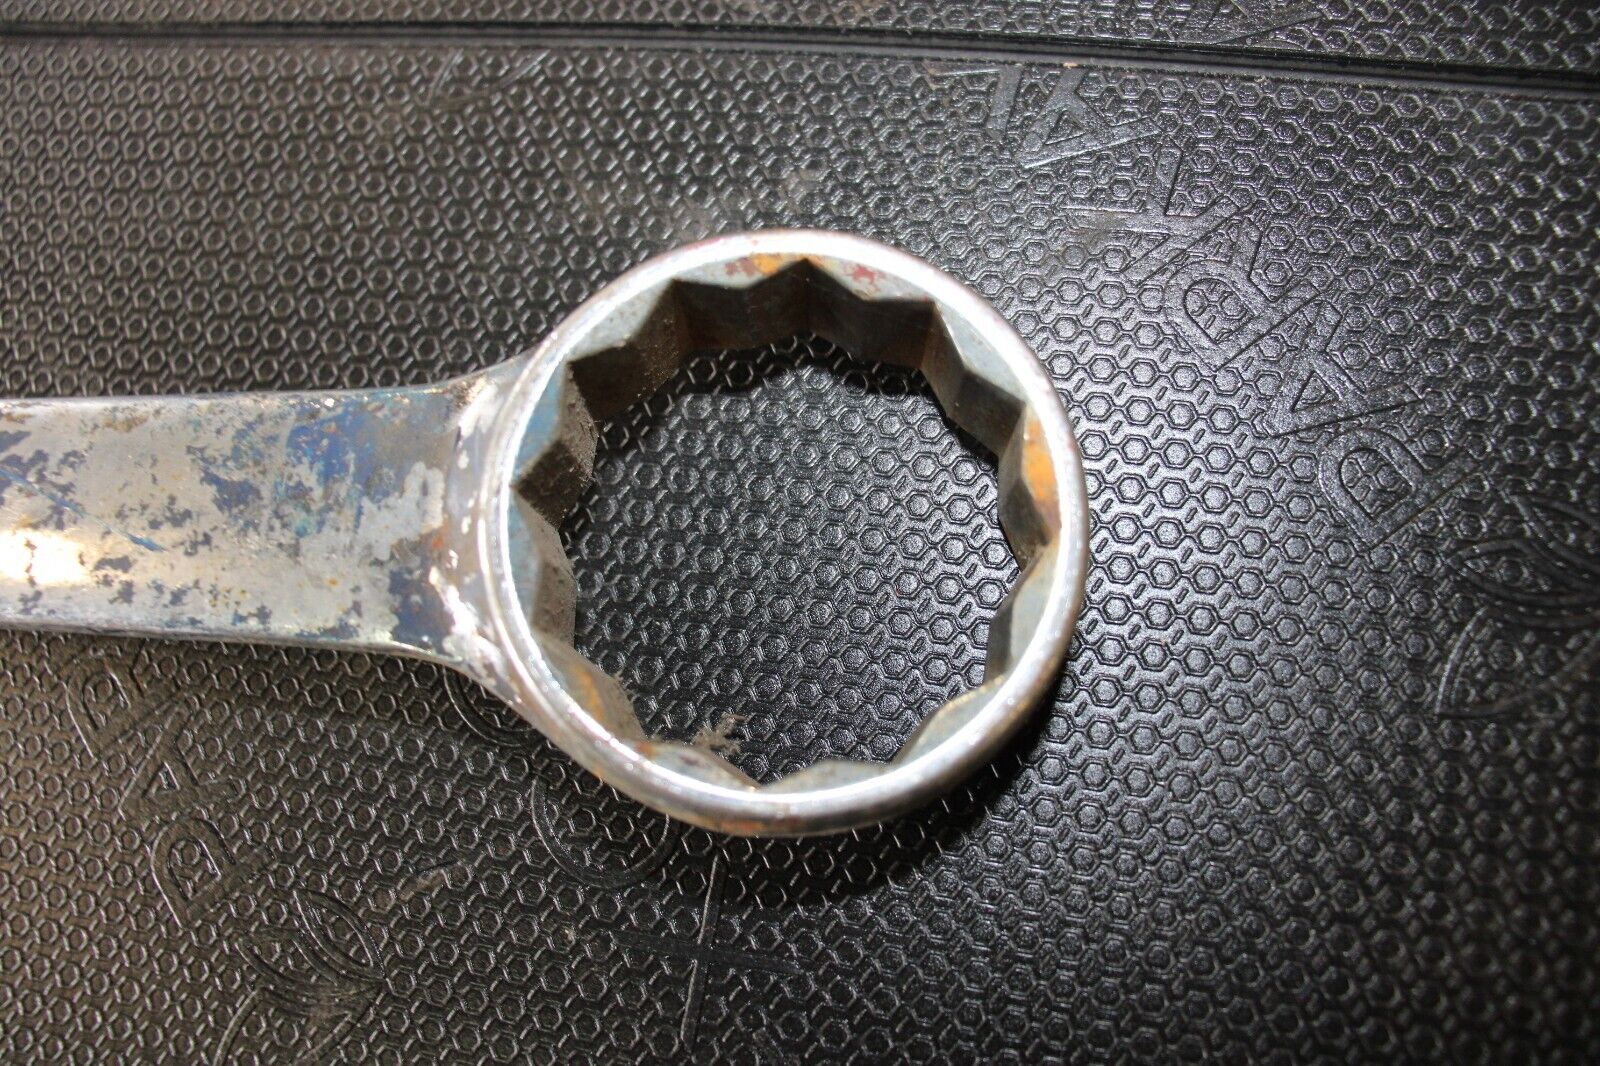 2 1/16 COMBINATION WRENCH ARMSTRONG 25-266